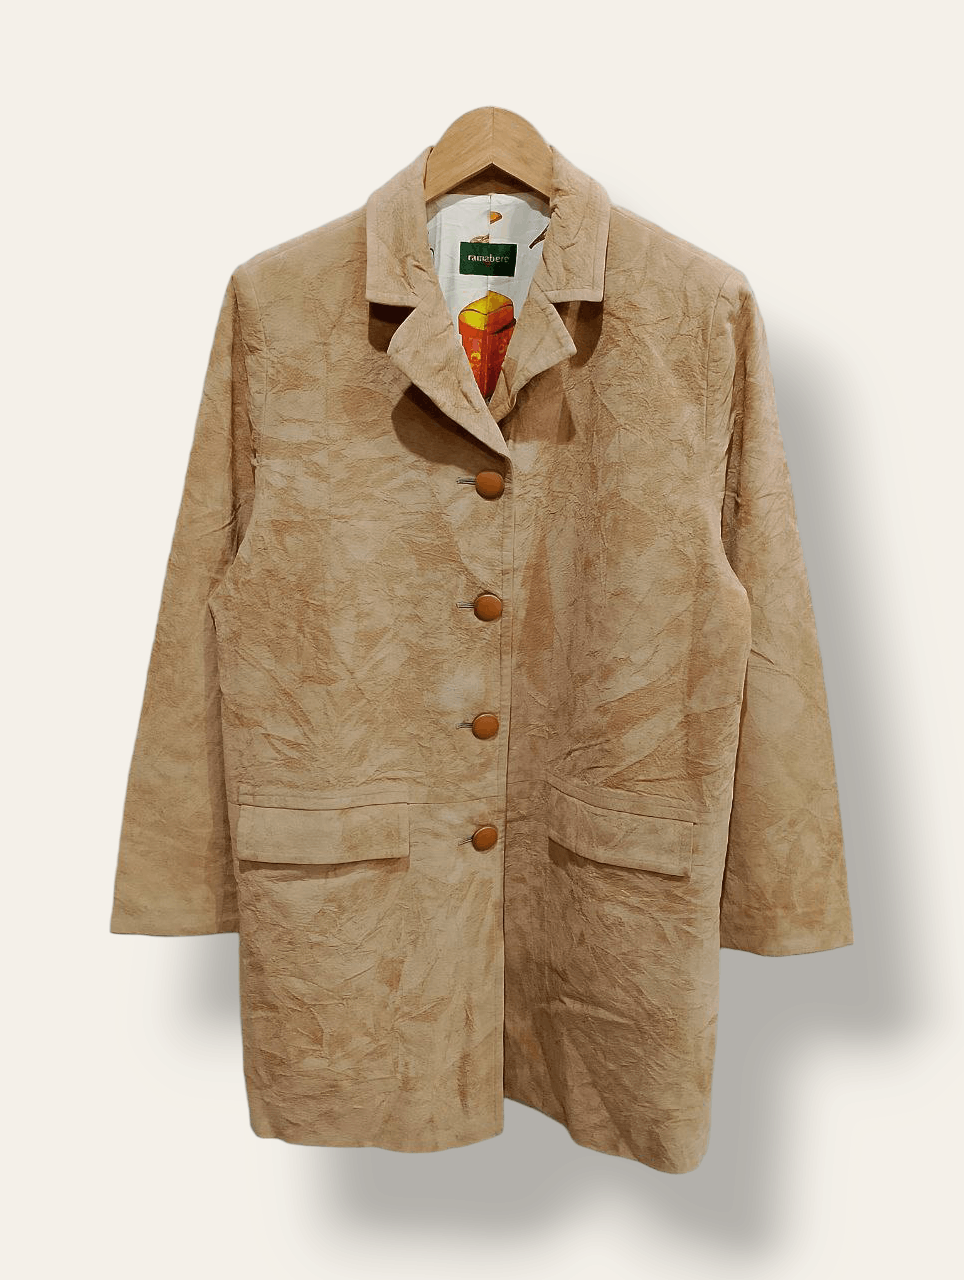 Archival Clothing - RAMABERE Tricot Japan Made Single Breasted Rayon Trench Coat - 1